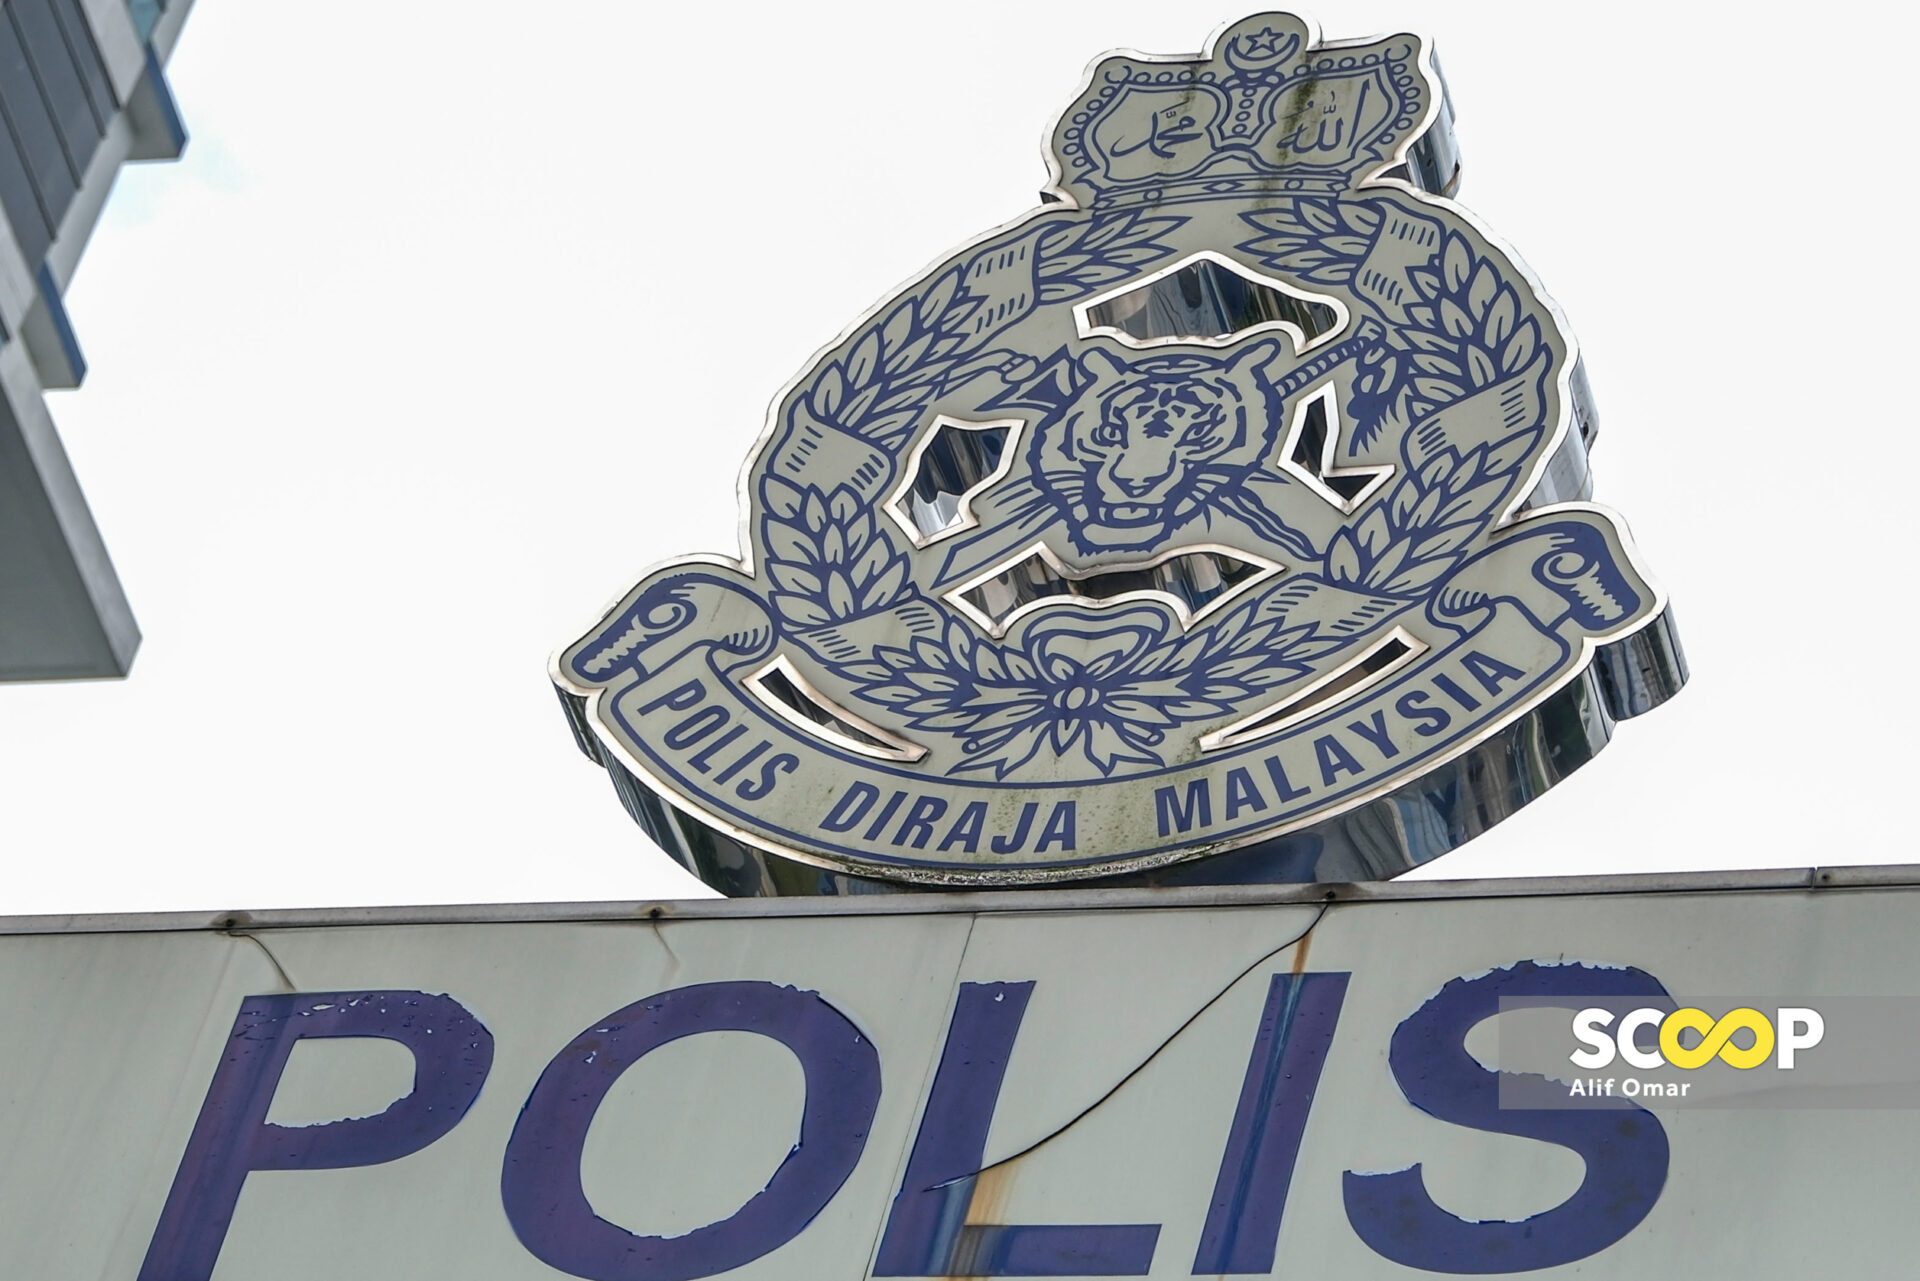 Two top CCID cops claim trial to taking RM1.25 mil in bribes to close firearms probe